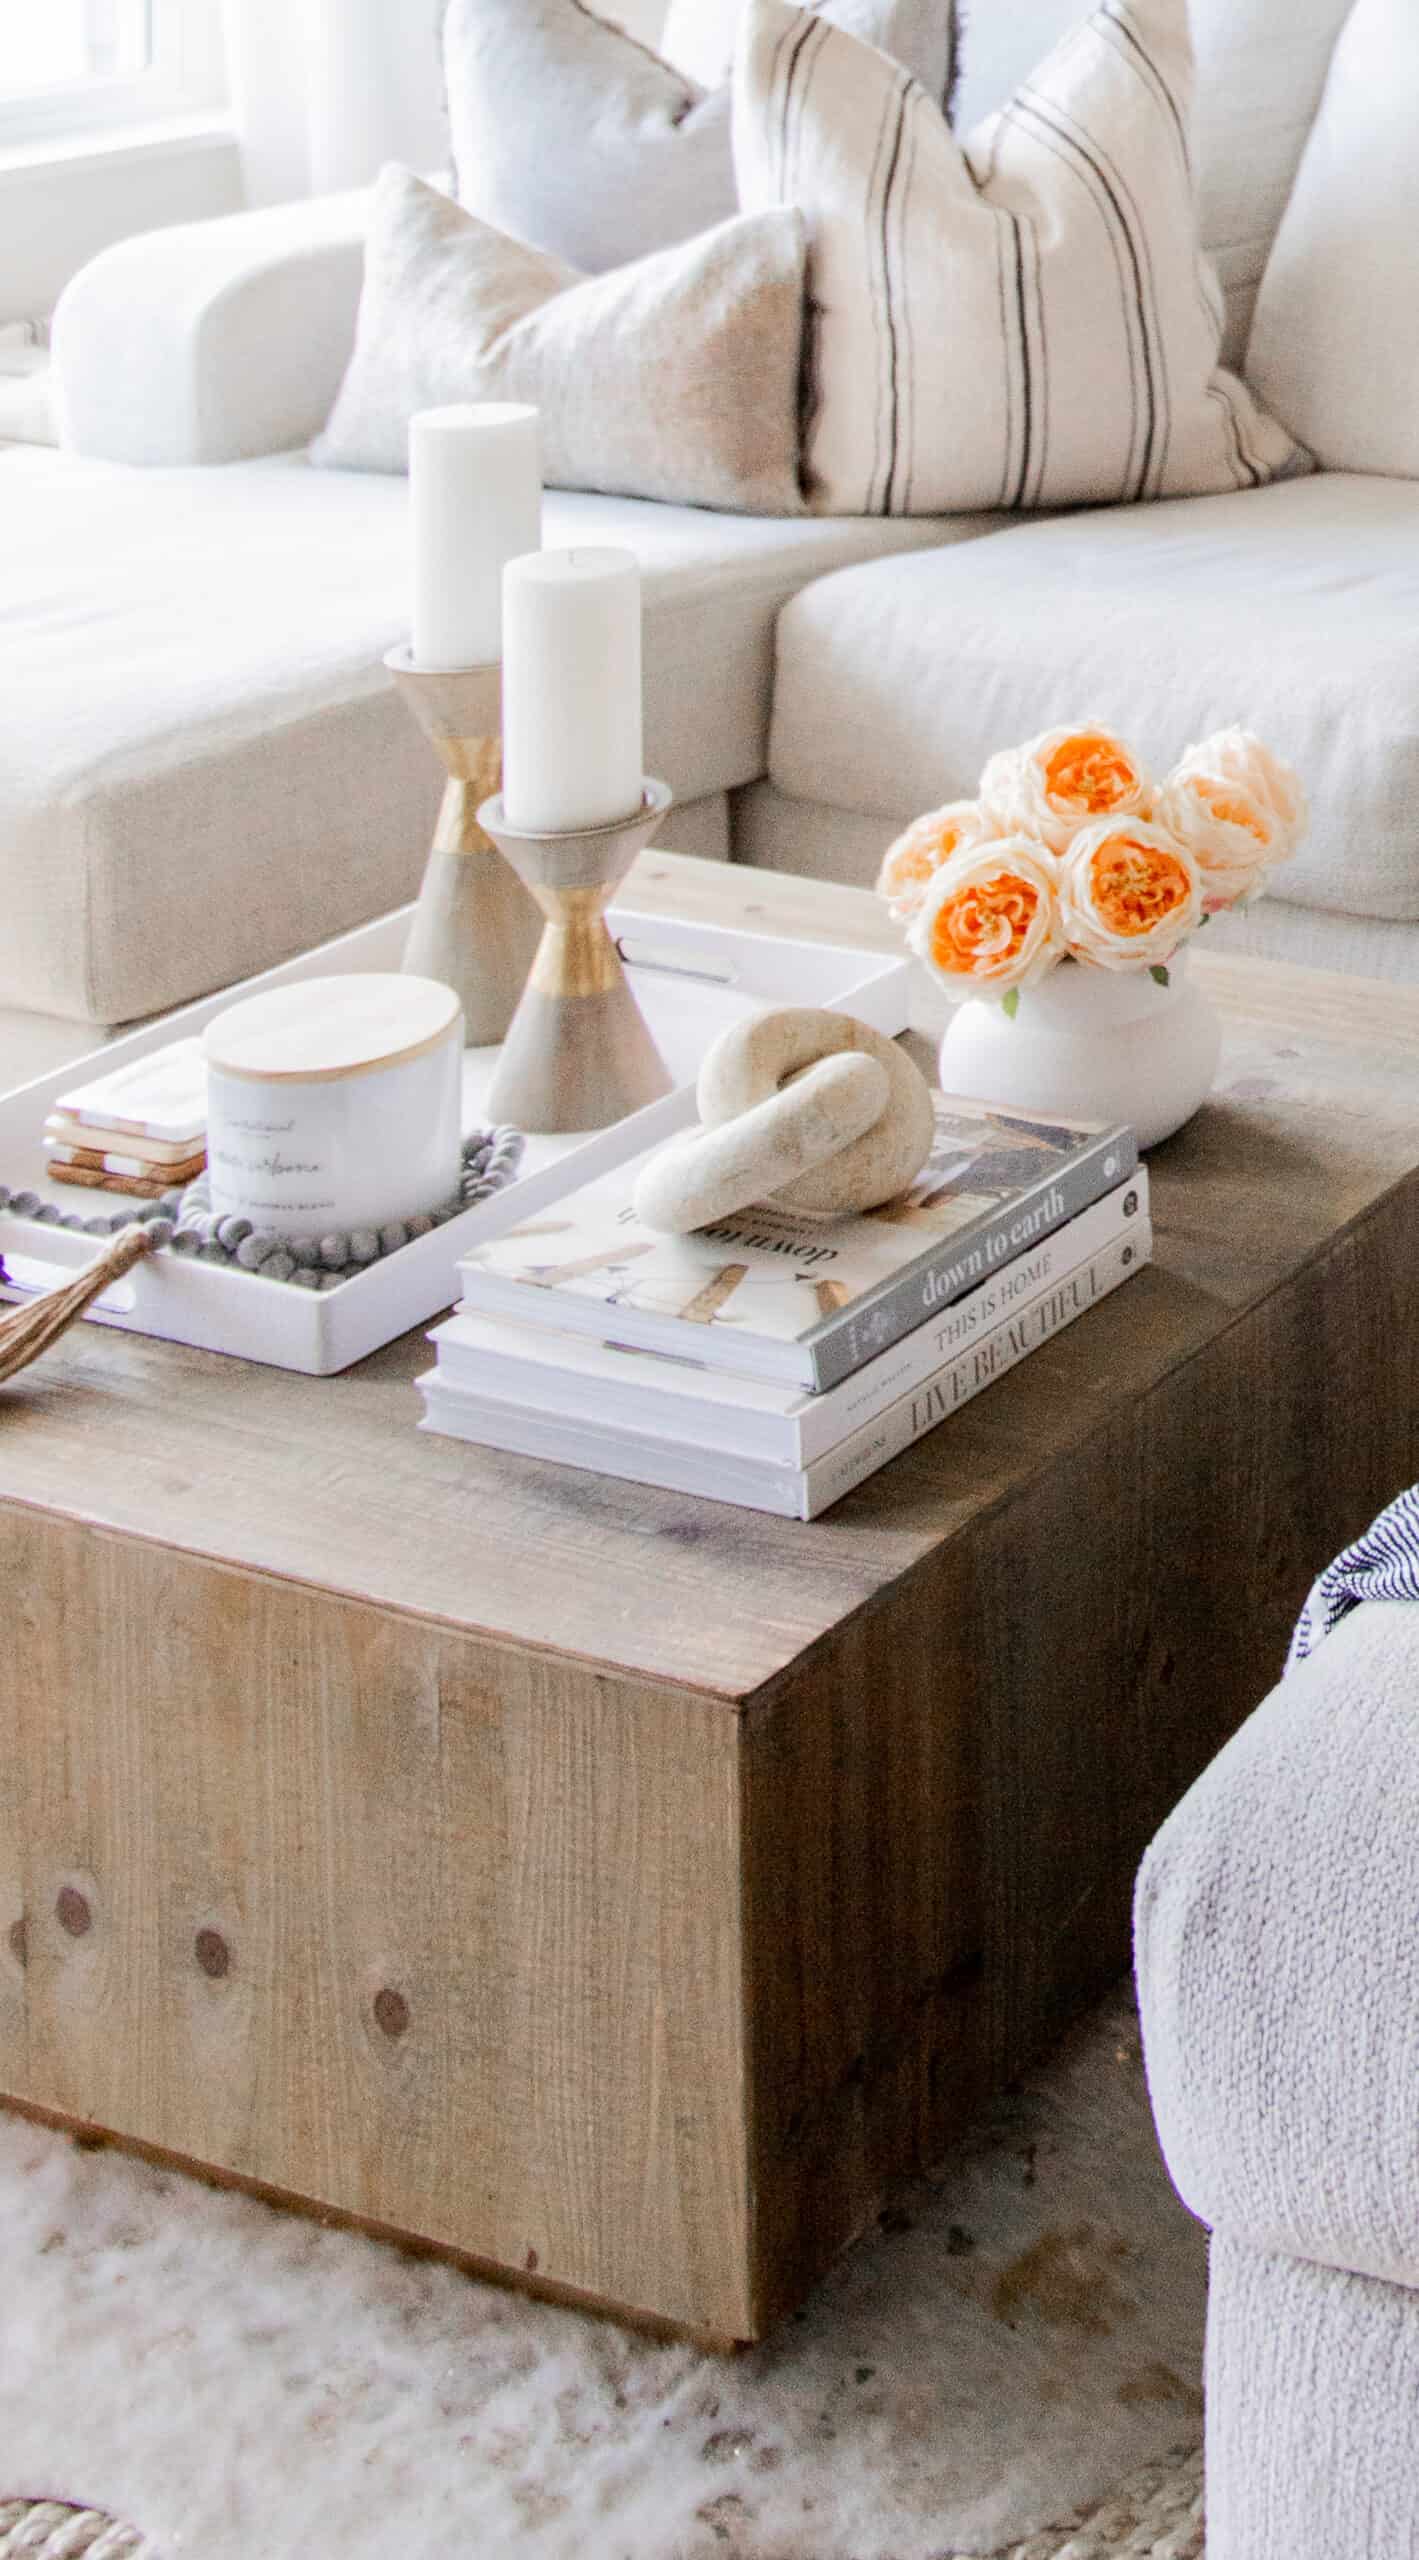 How to Style Your Home: 21 Beautiful Coffee Table Books - Elizabeth Street  Post